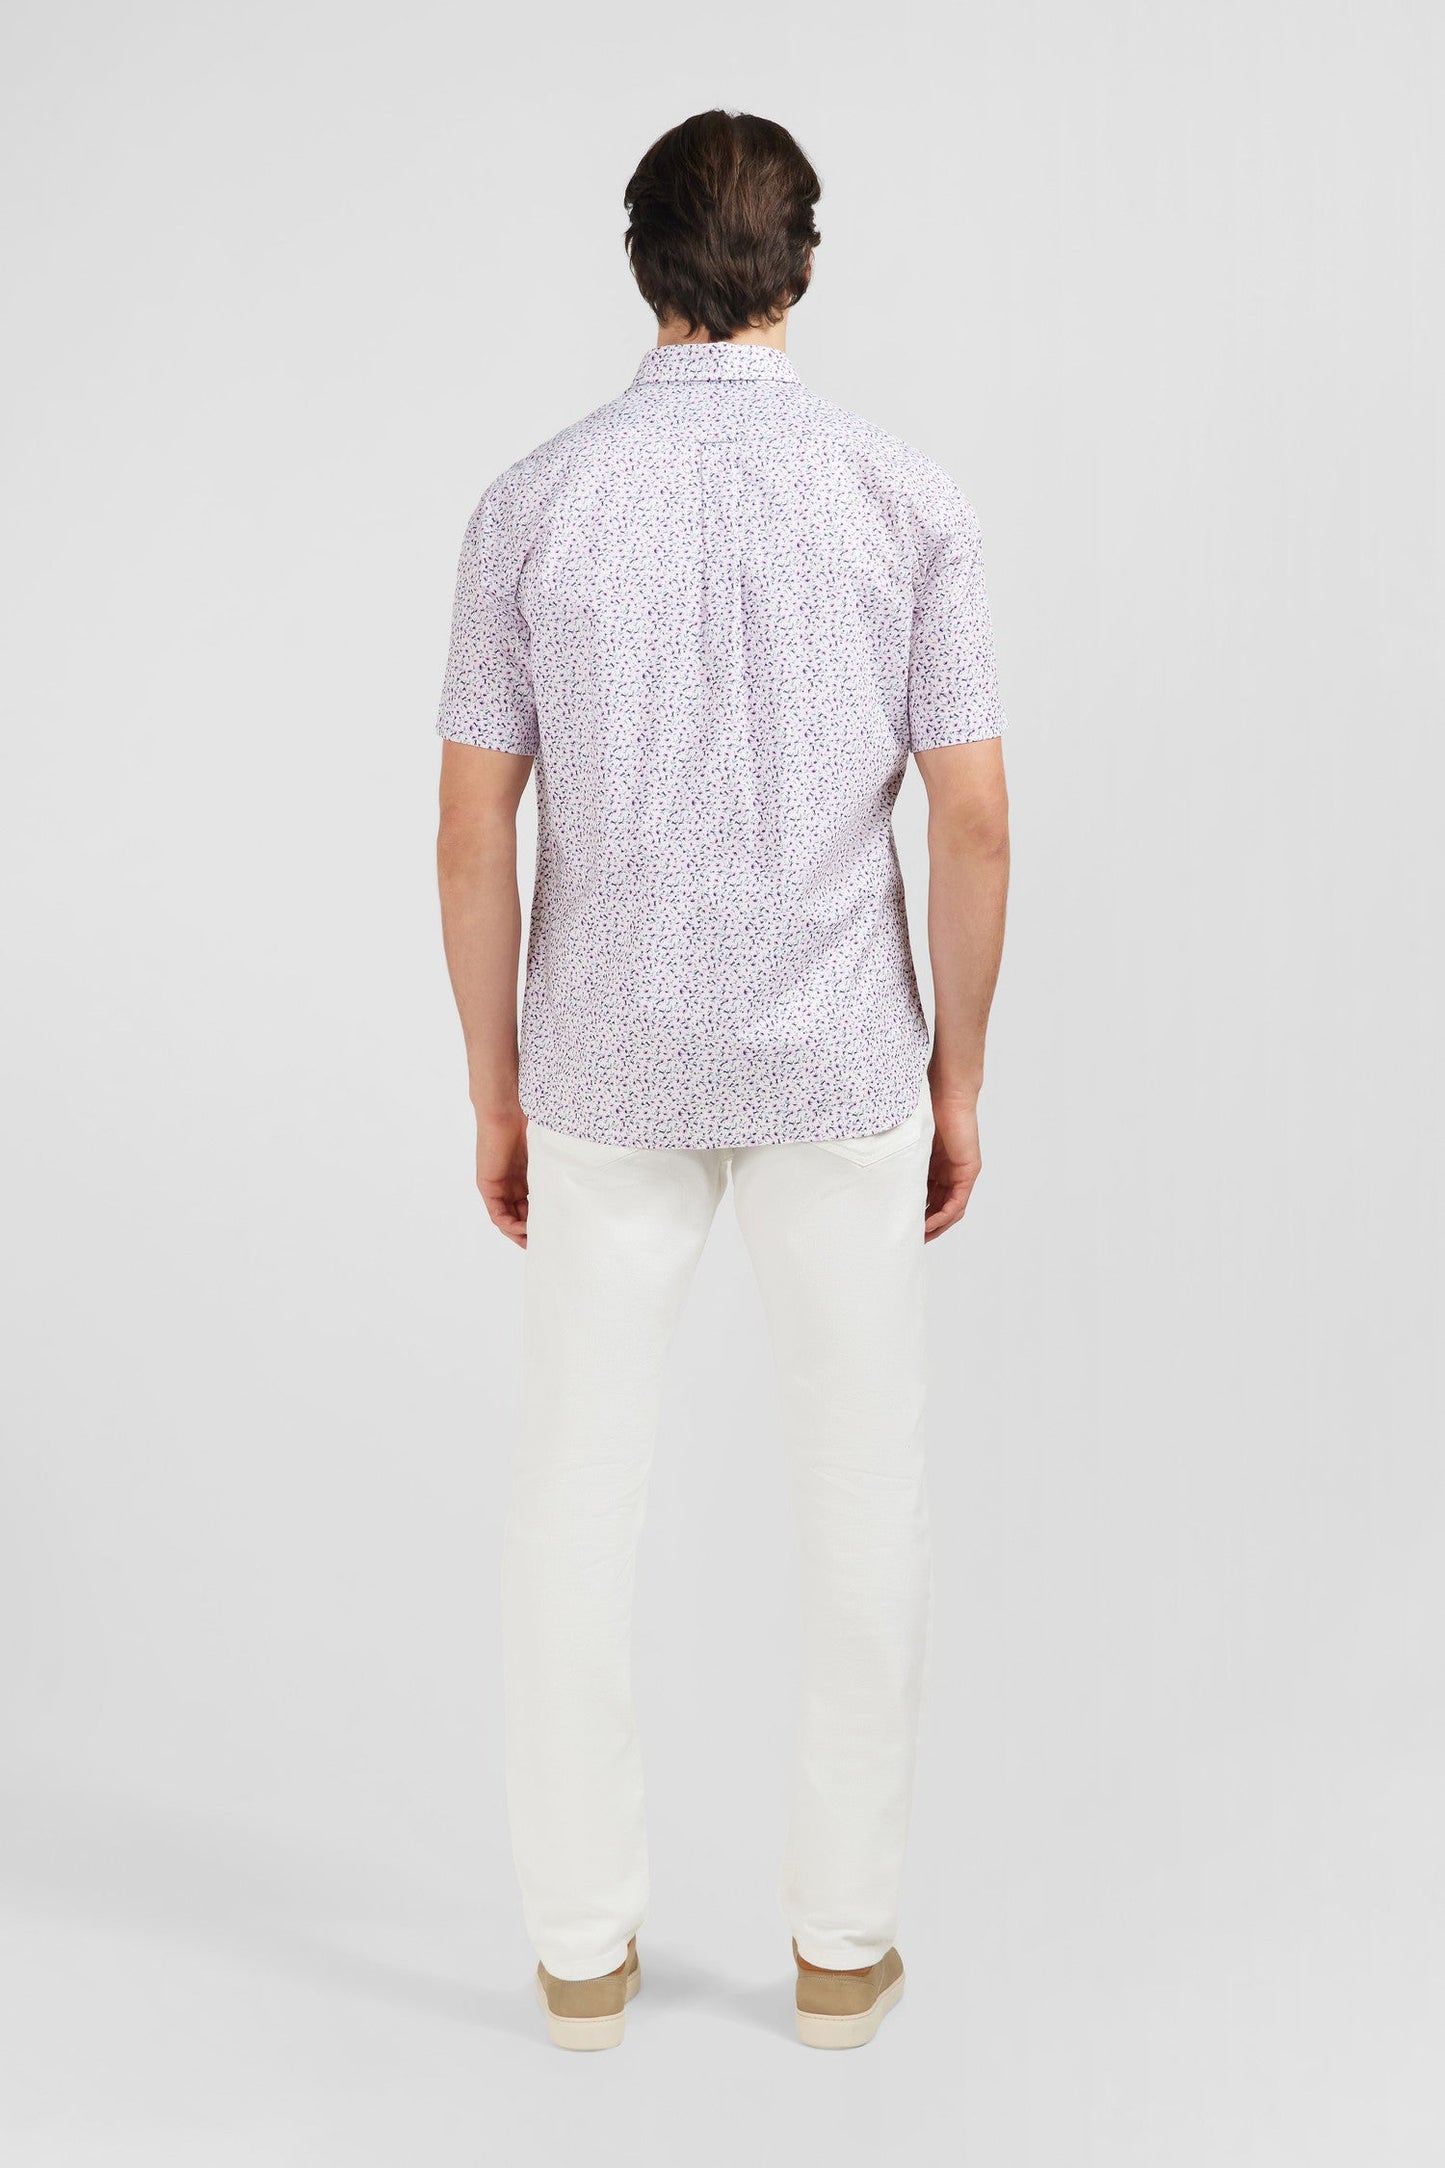 White shirt with exclusive floral print - Image 6